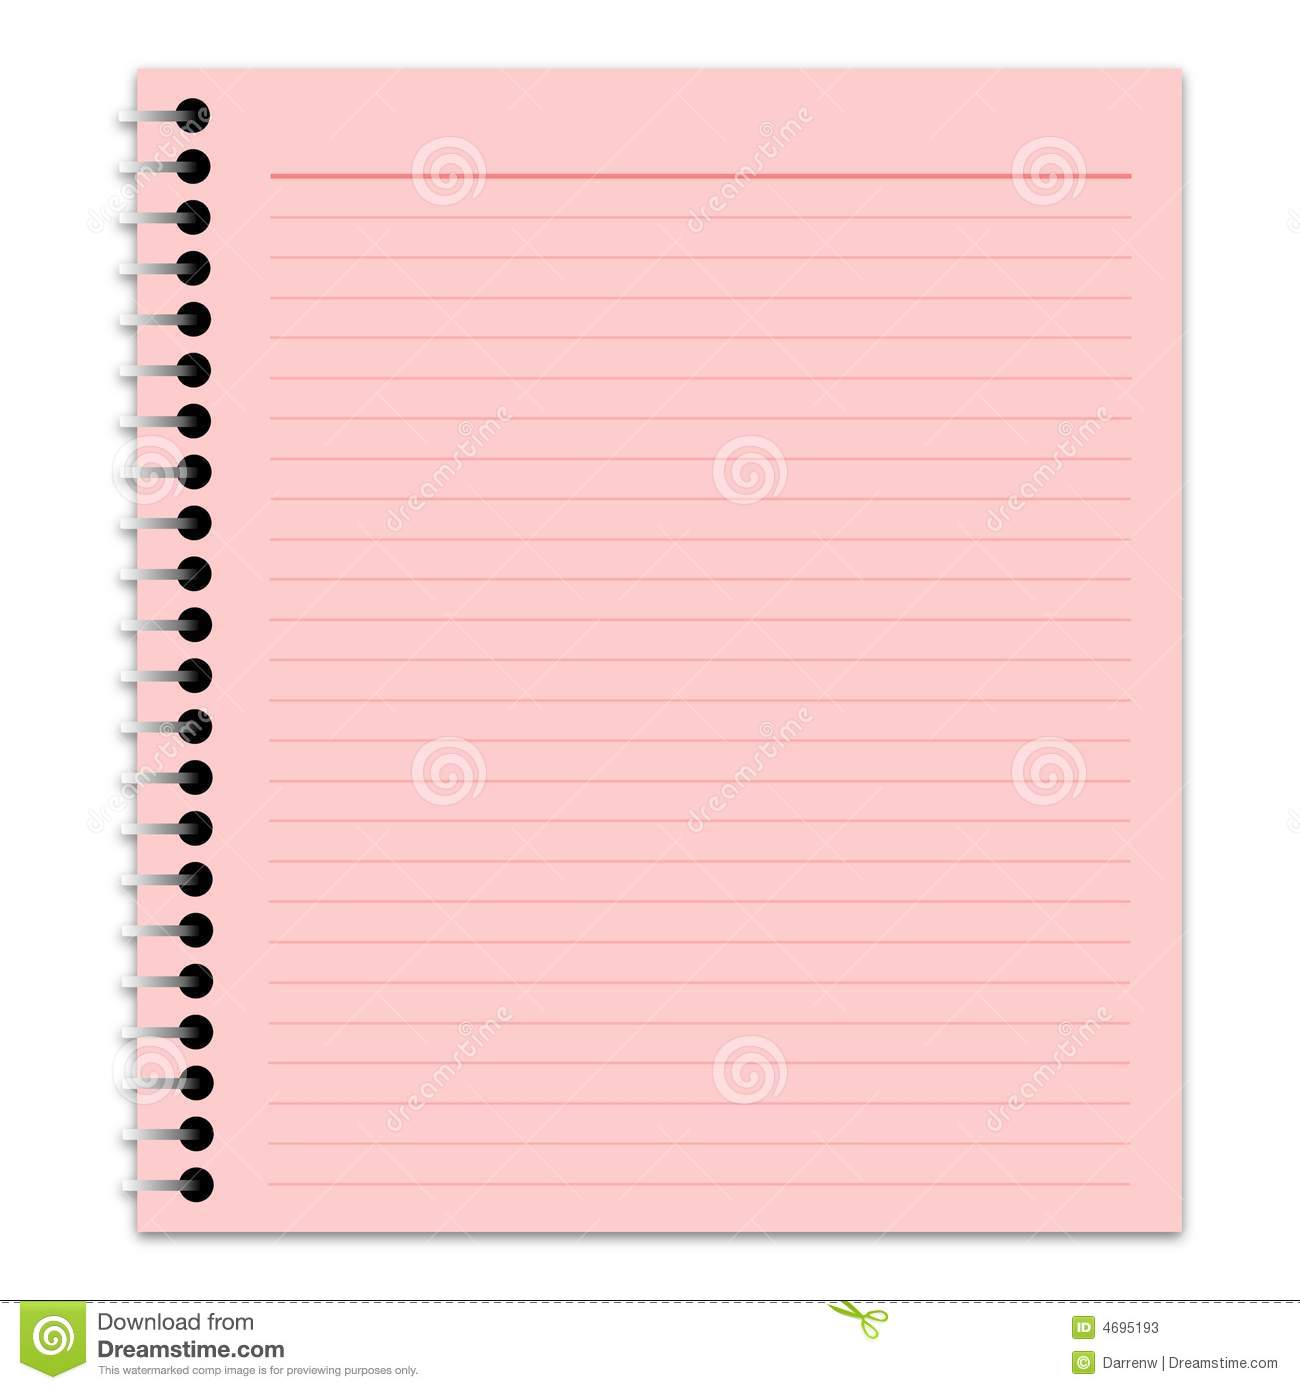 Illustration Of A Lined Pink Notepad Page With Drop Shadow Over A